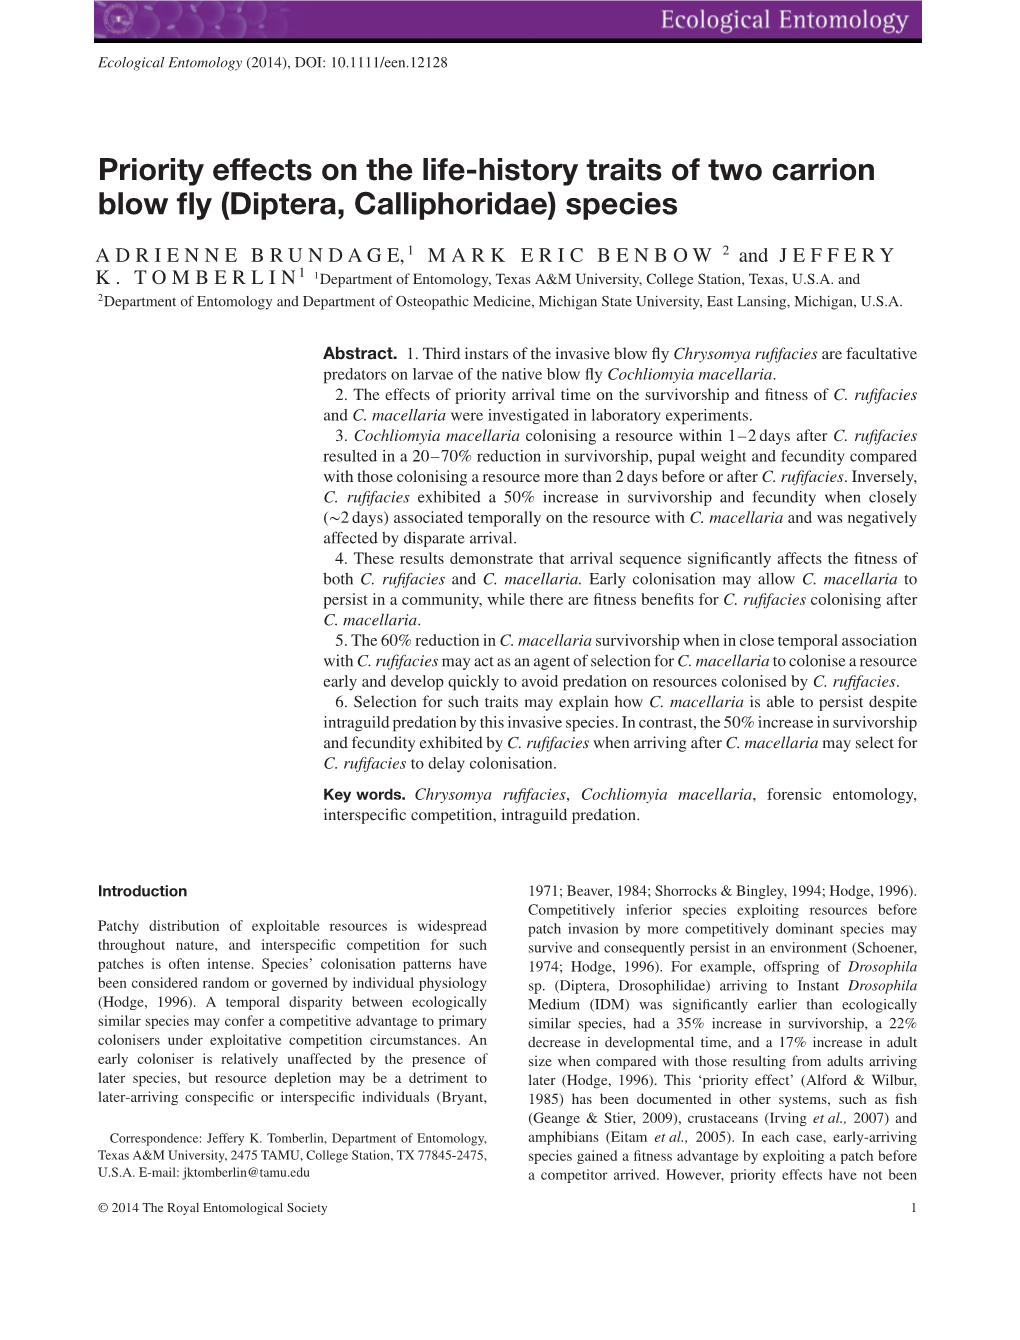 Priority Effects on the Life-History Traits of Two Carrion Blow ﬂy (Diptera, Calliphoridae) Species